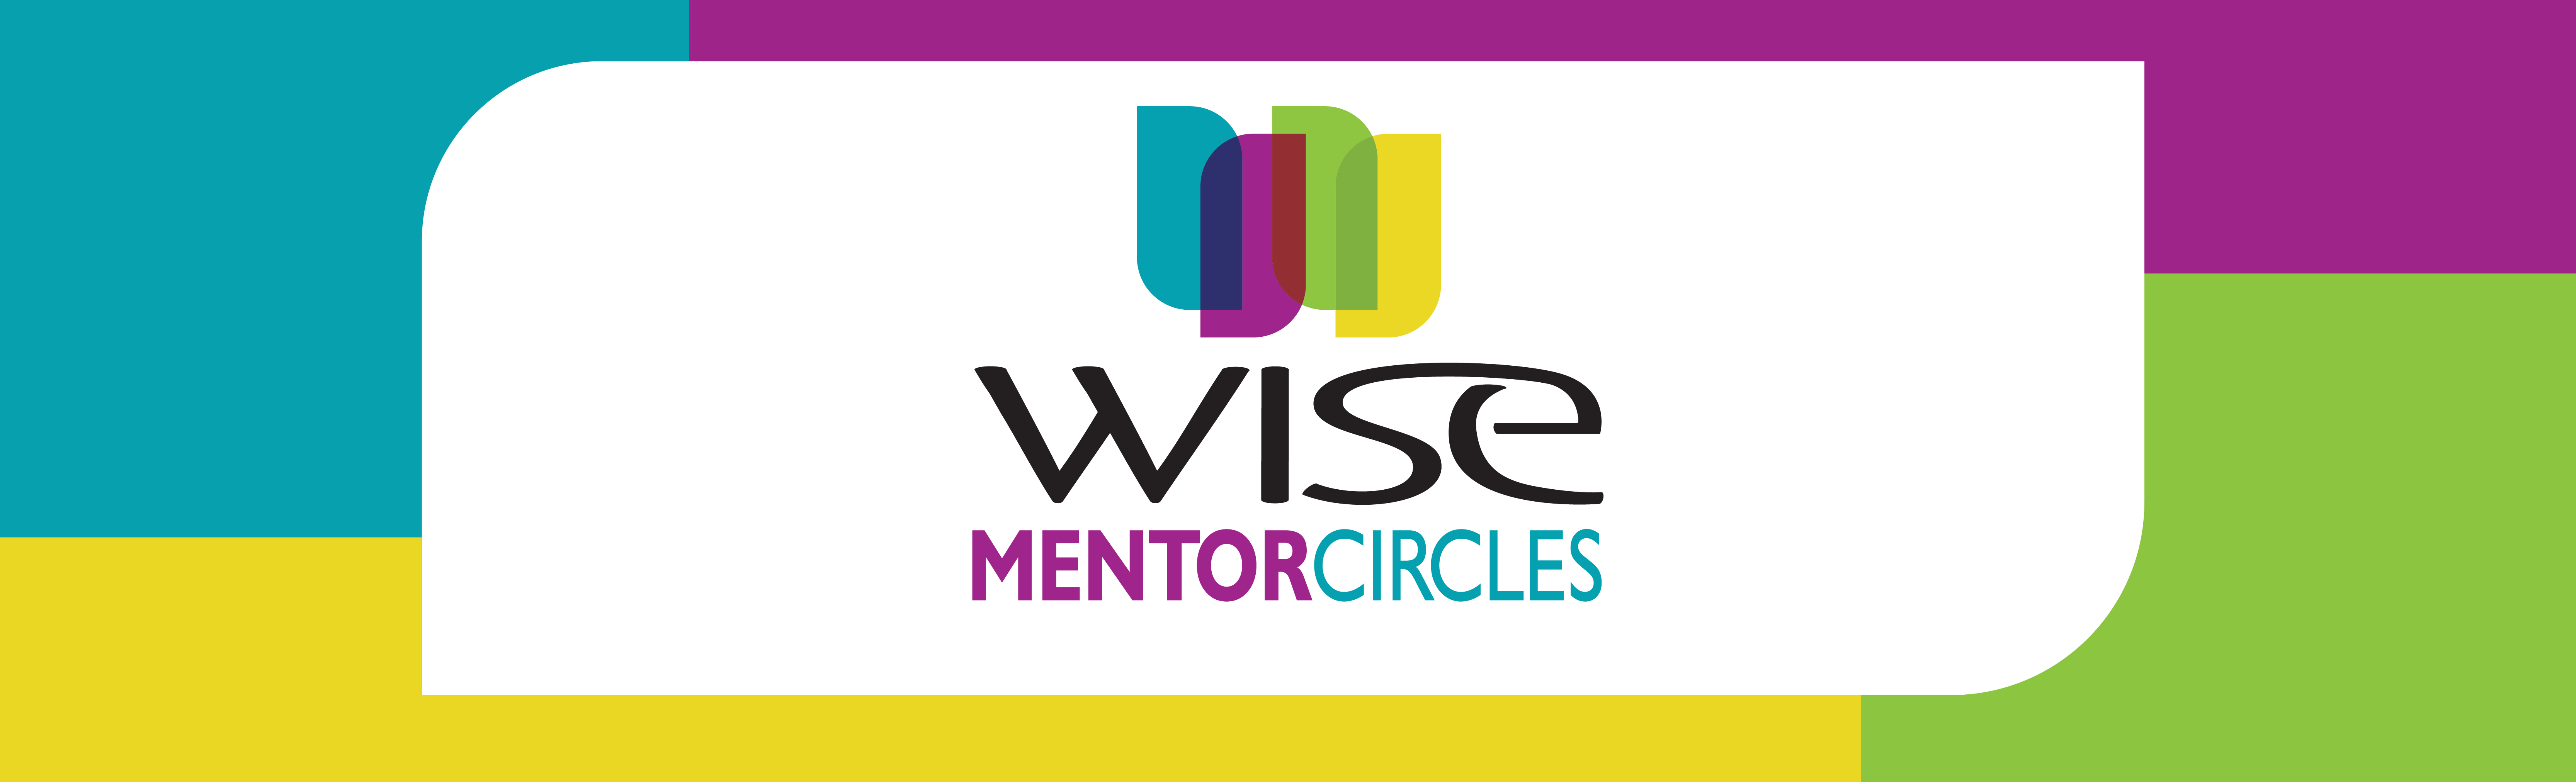 2021 WISE Web Headers MENTOR CIRCLES